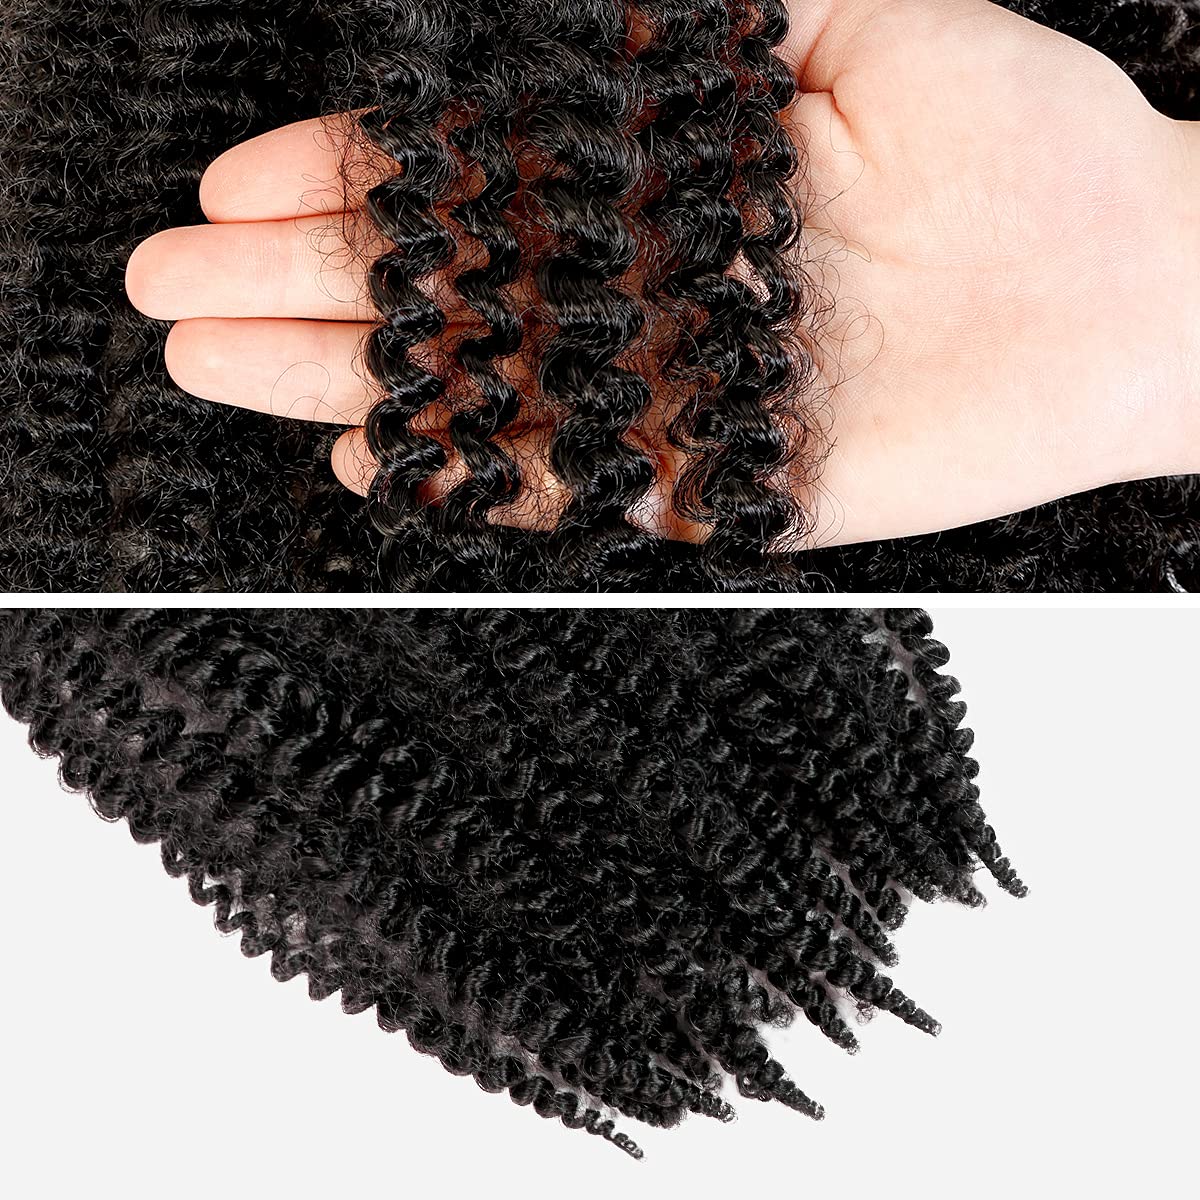 ToyoTress Tiana Passion Twist Hair - 10 inch 8 Packs Pre-Twisted Passion  Twists, Pre-Looped Crochet Braids Made Of Bohemian Hair Synthetic Braiding  Hair Extensi… | Twist hairstyles, Twist braid hairstyles, Crochet braids  hairstyles